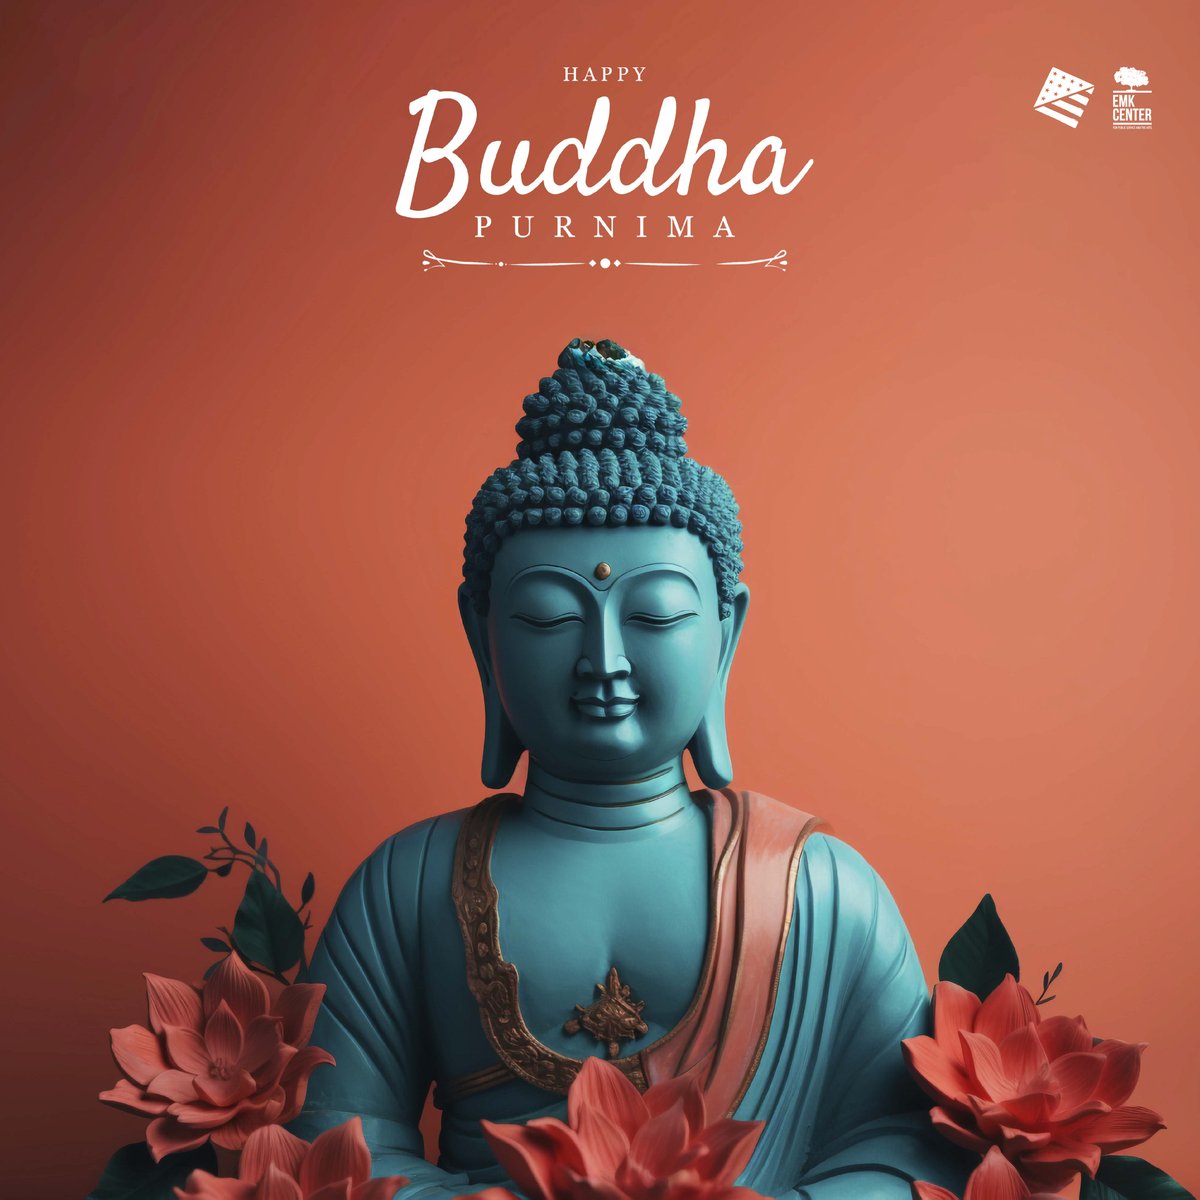 🎉 Happy Buddha Purnima! Join us in celebrating the birth, enlightenment, and nirvana of Gautama Buddha. Let's honor his teachings of peace, compassion, and wisdom together!
#BuddhaPurnima #Celebration #emkcenter #amspaces #americanspaces